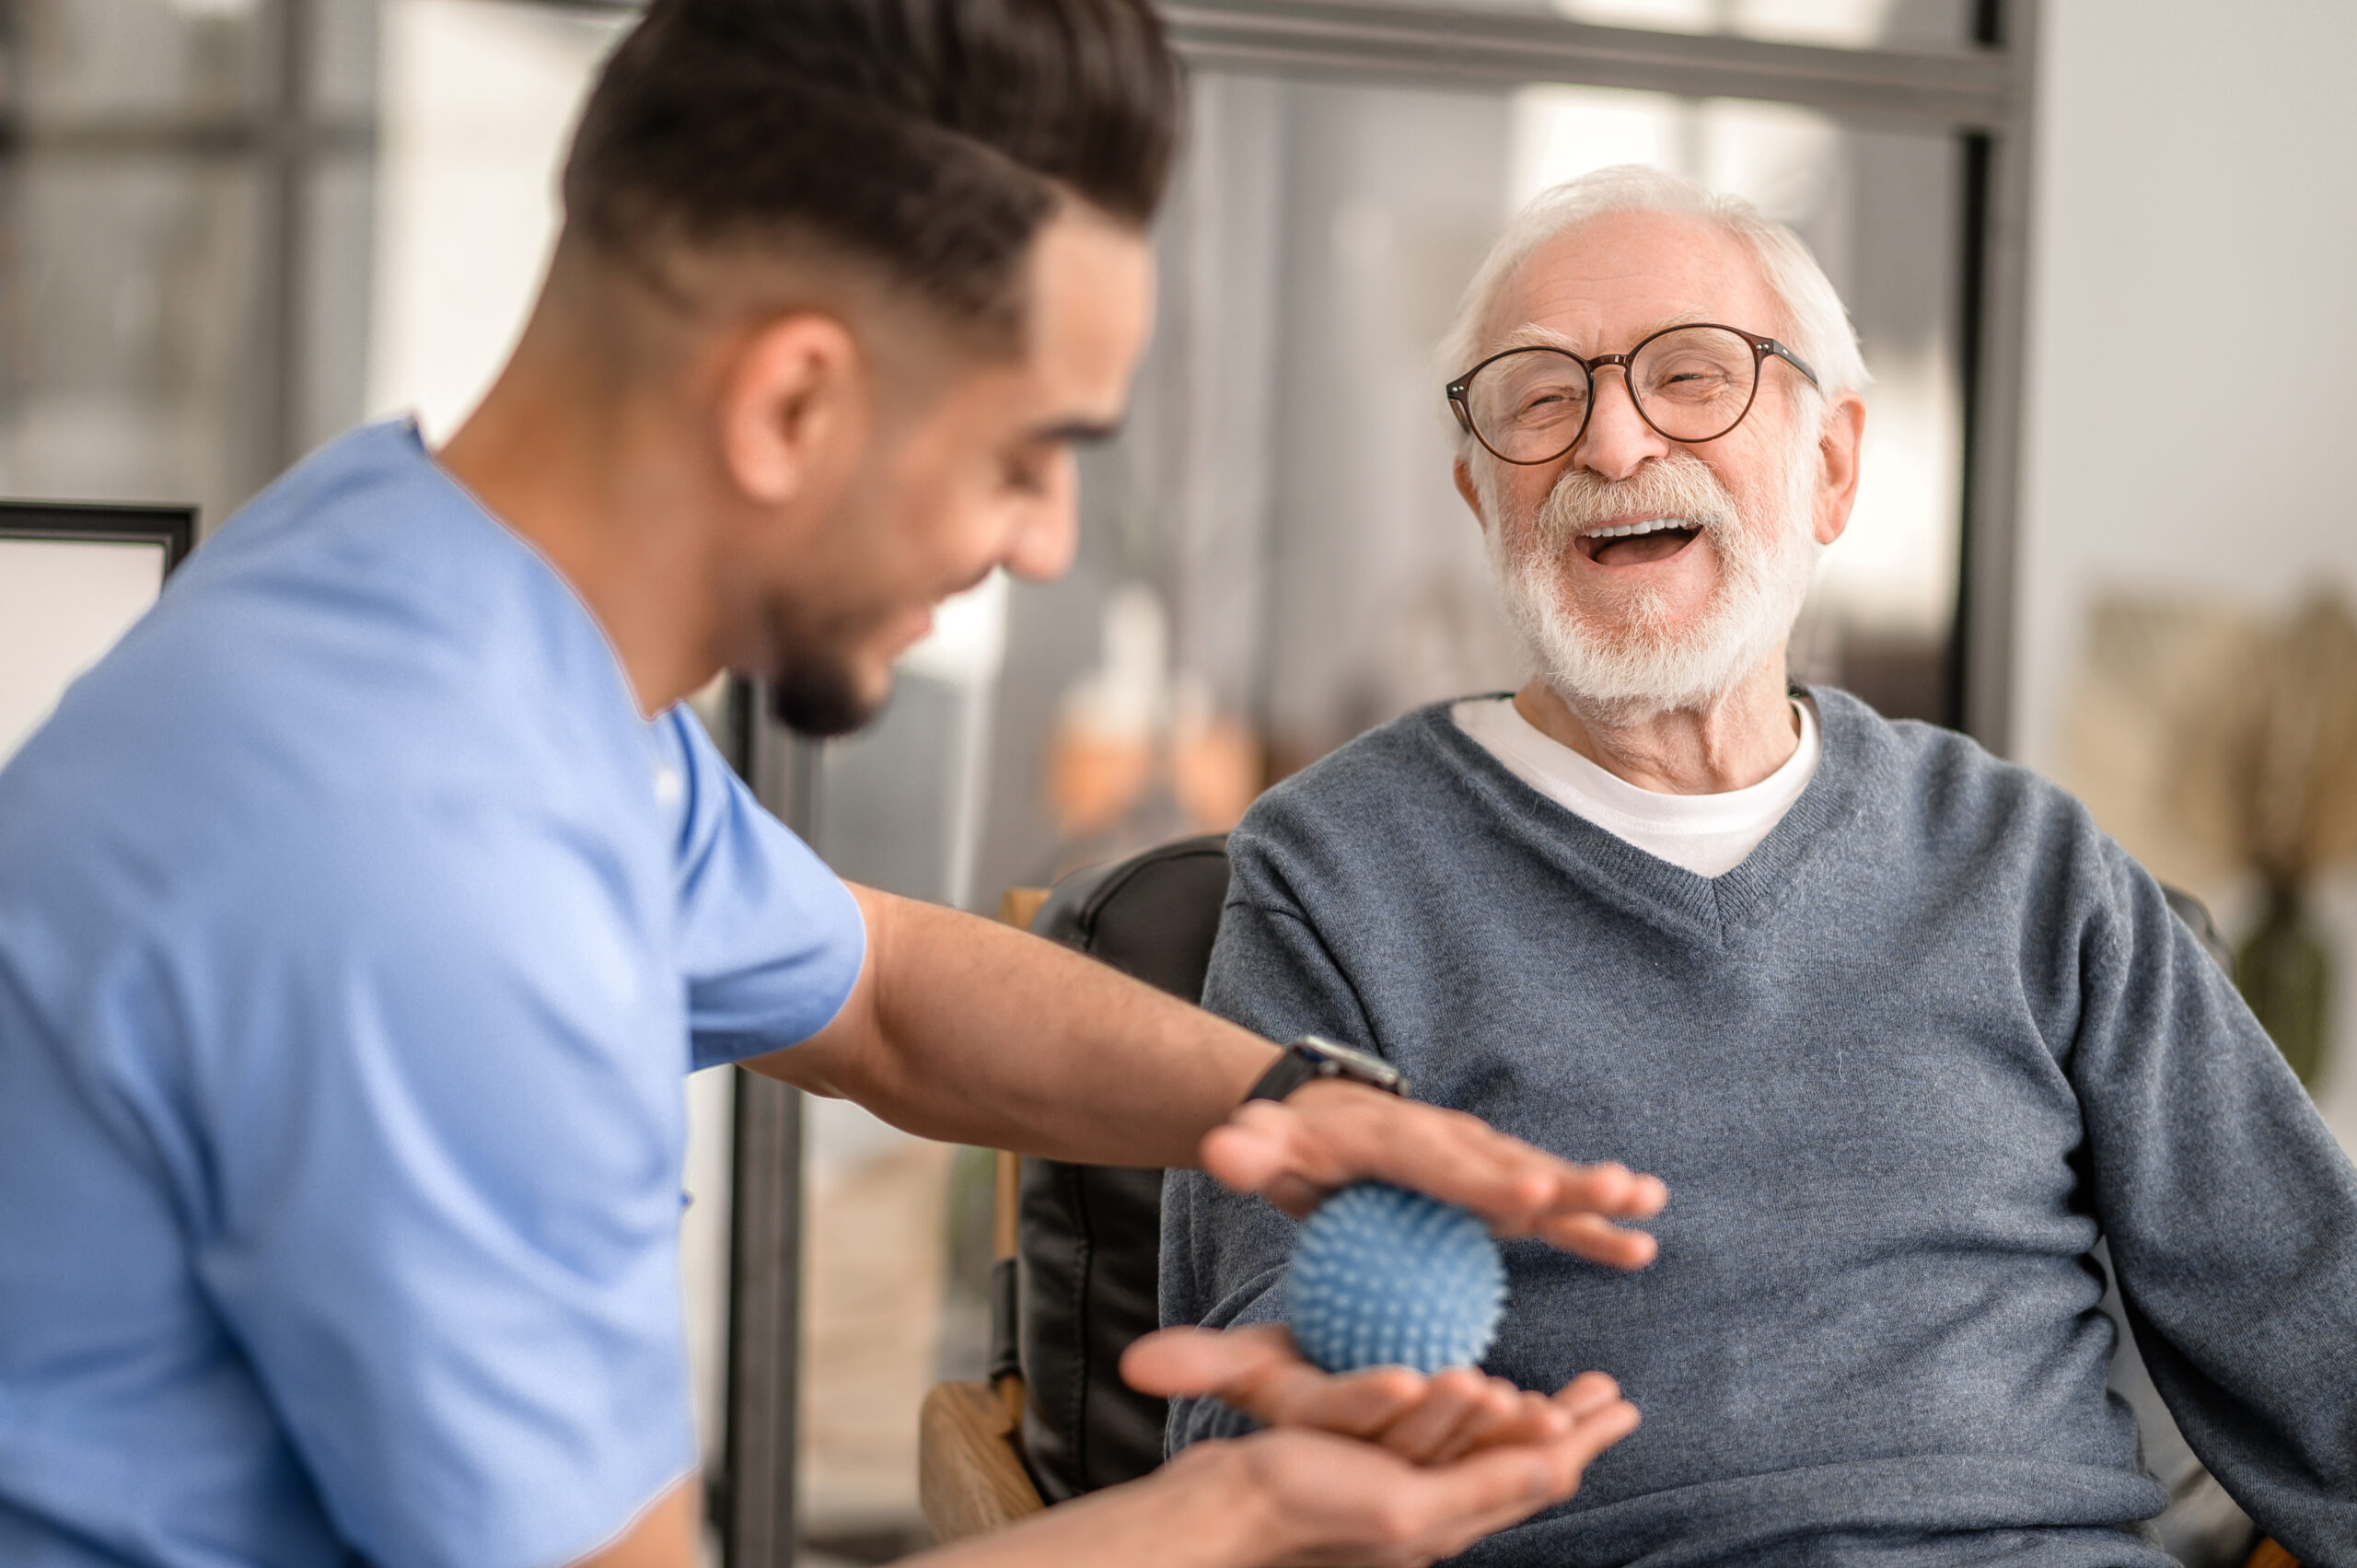 Joyous aged man undergoing a session of physical therapy conducted by an experienced physical therapist